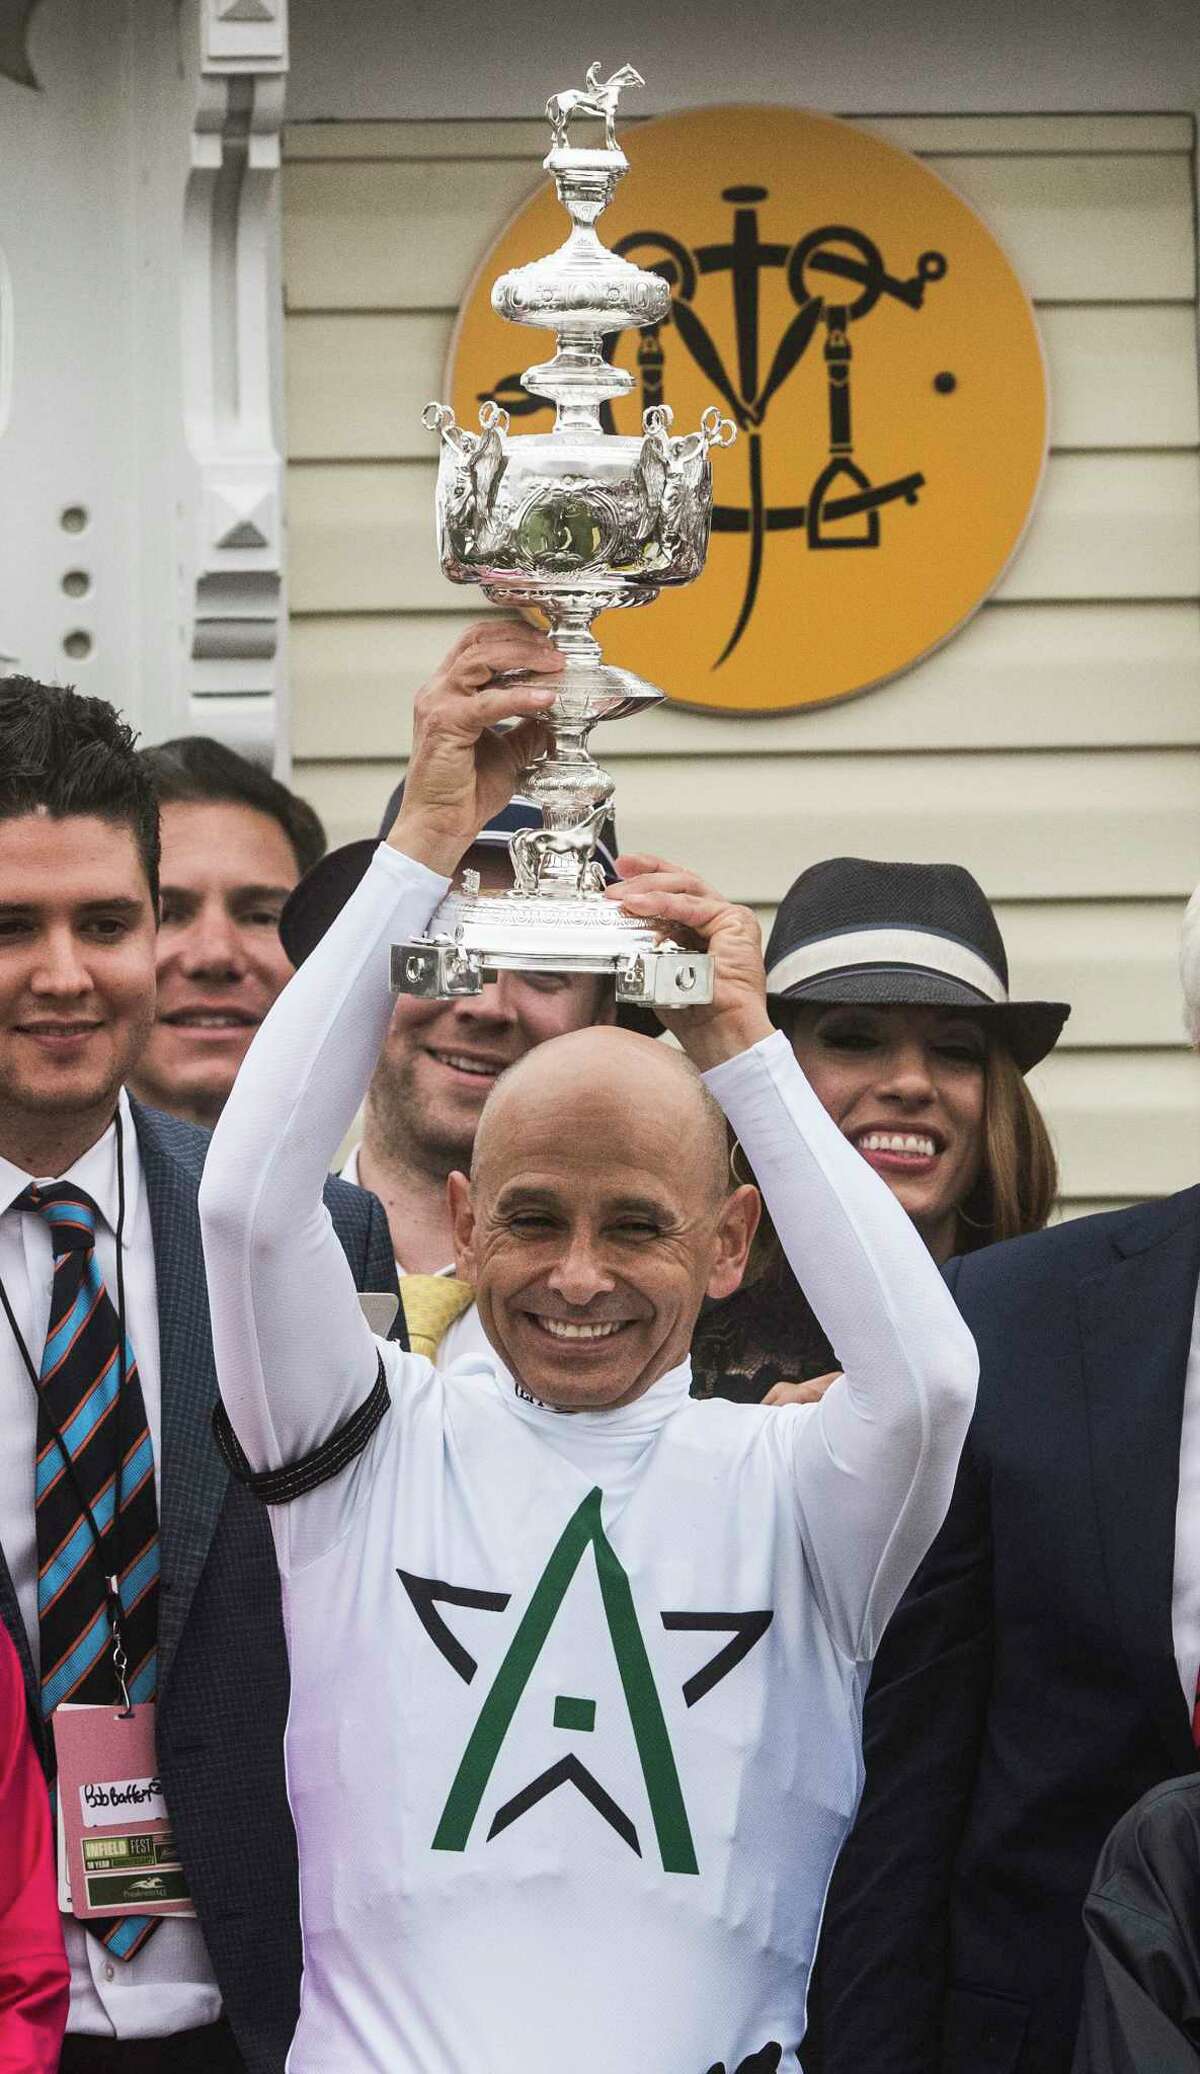 Jockey Mike Smith holds the winner's trophy aloft after Justify won the 143rd running of the Preakness Stakes at the Pimlico Race Course on Preakness Day Saturday May 19, 2018 in Baltimore, MD. (Skip Dickstein/Times Union)